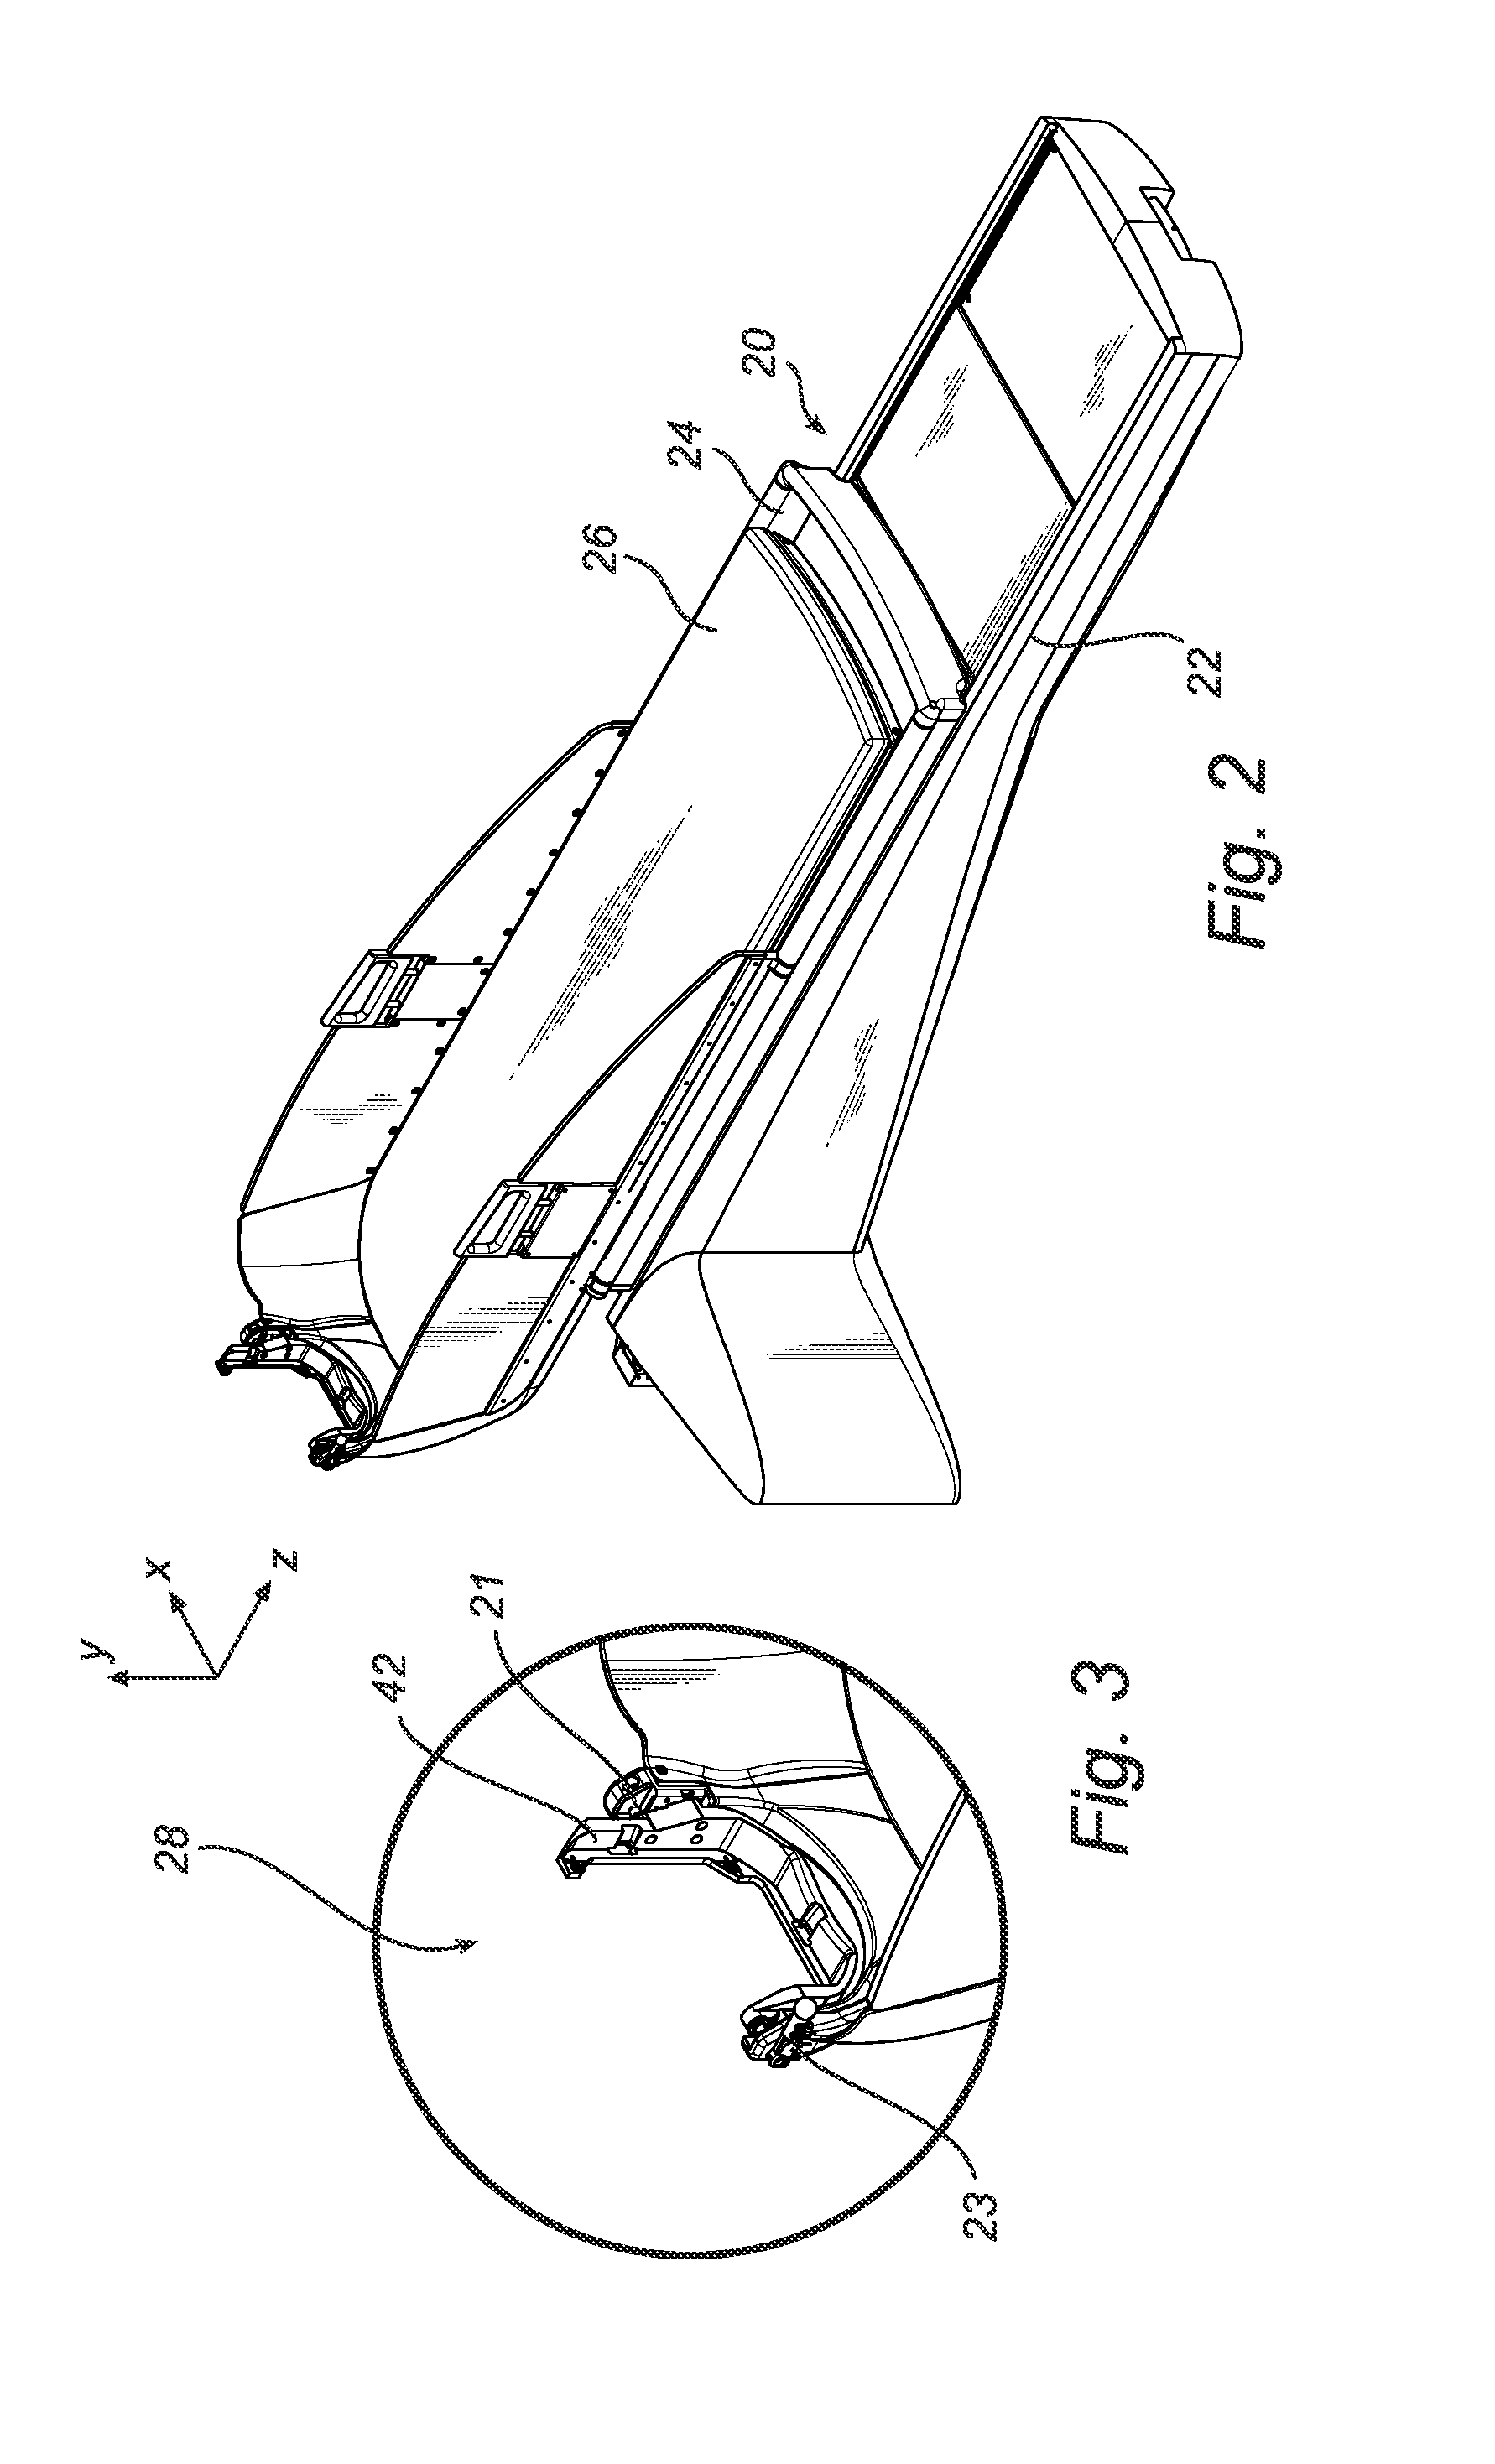 Intra-fraction motion management system and method